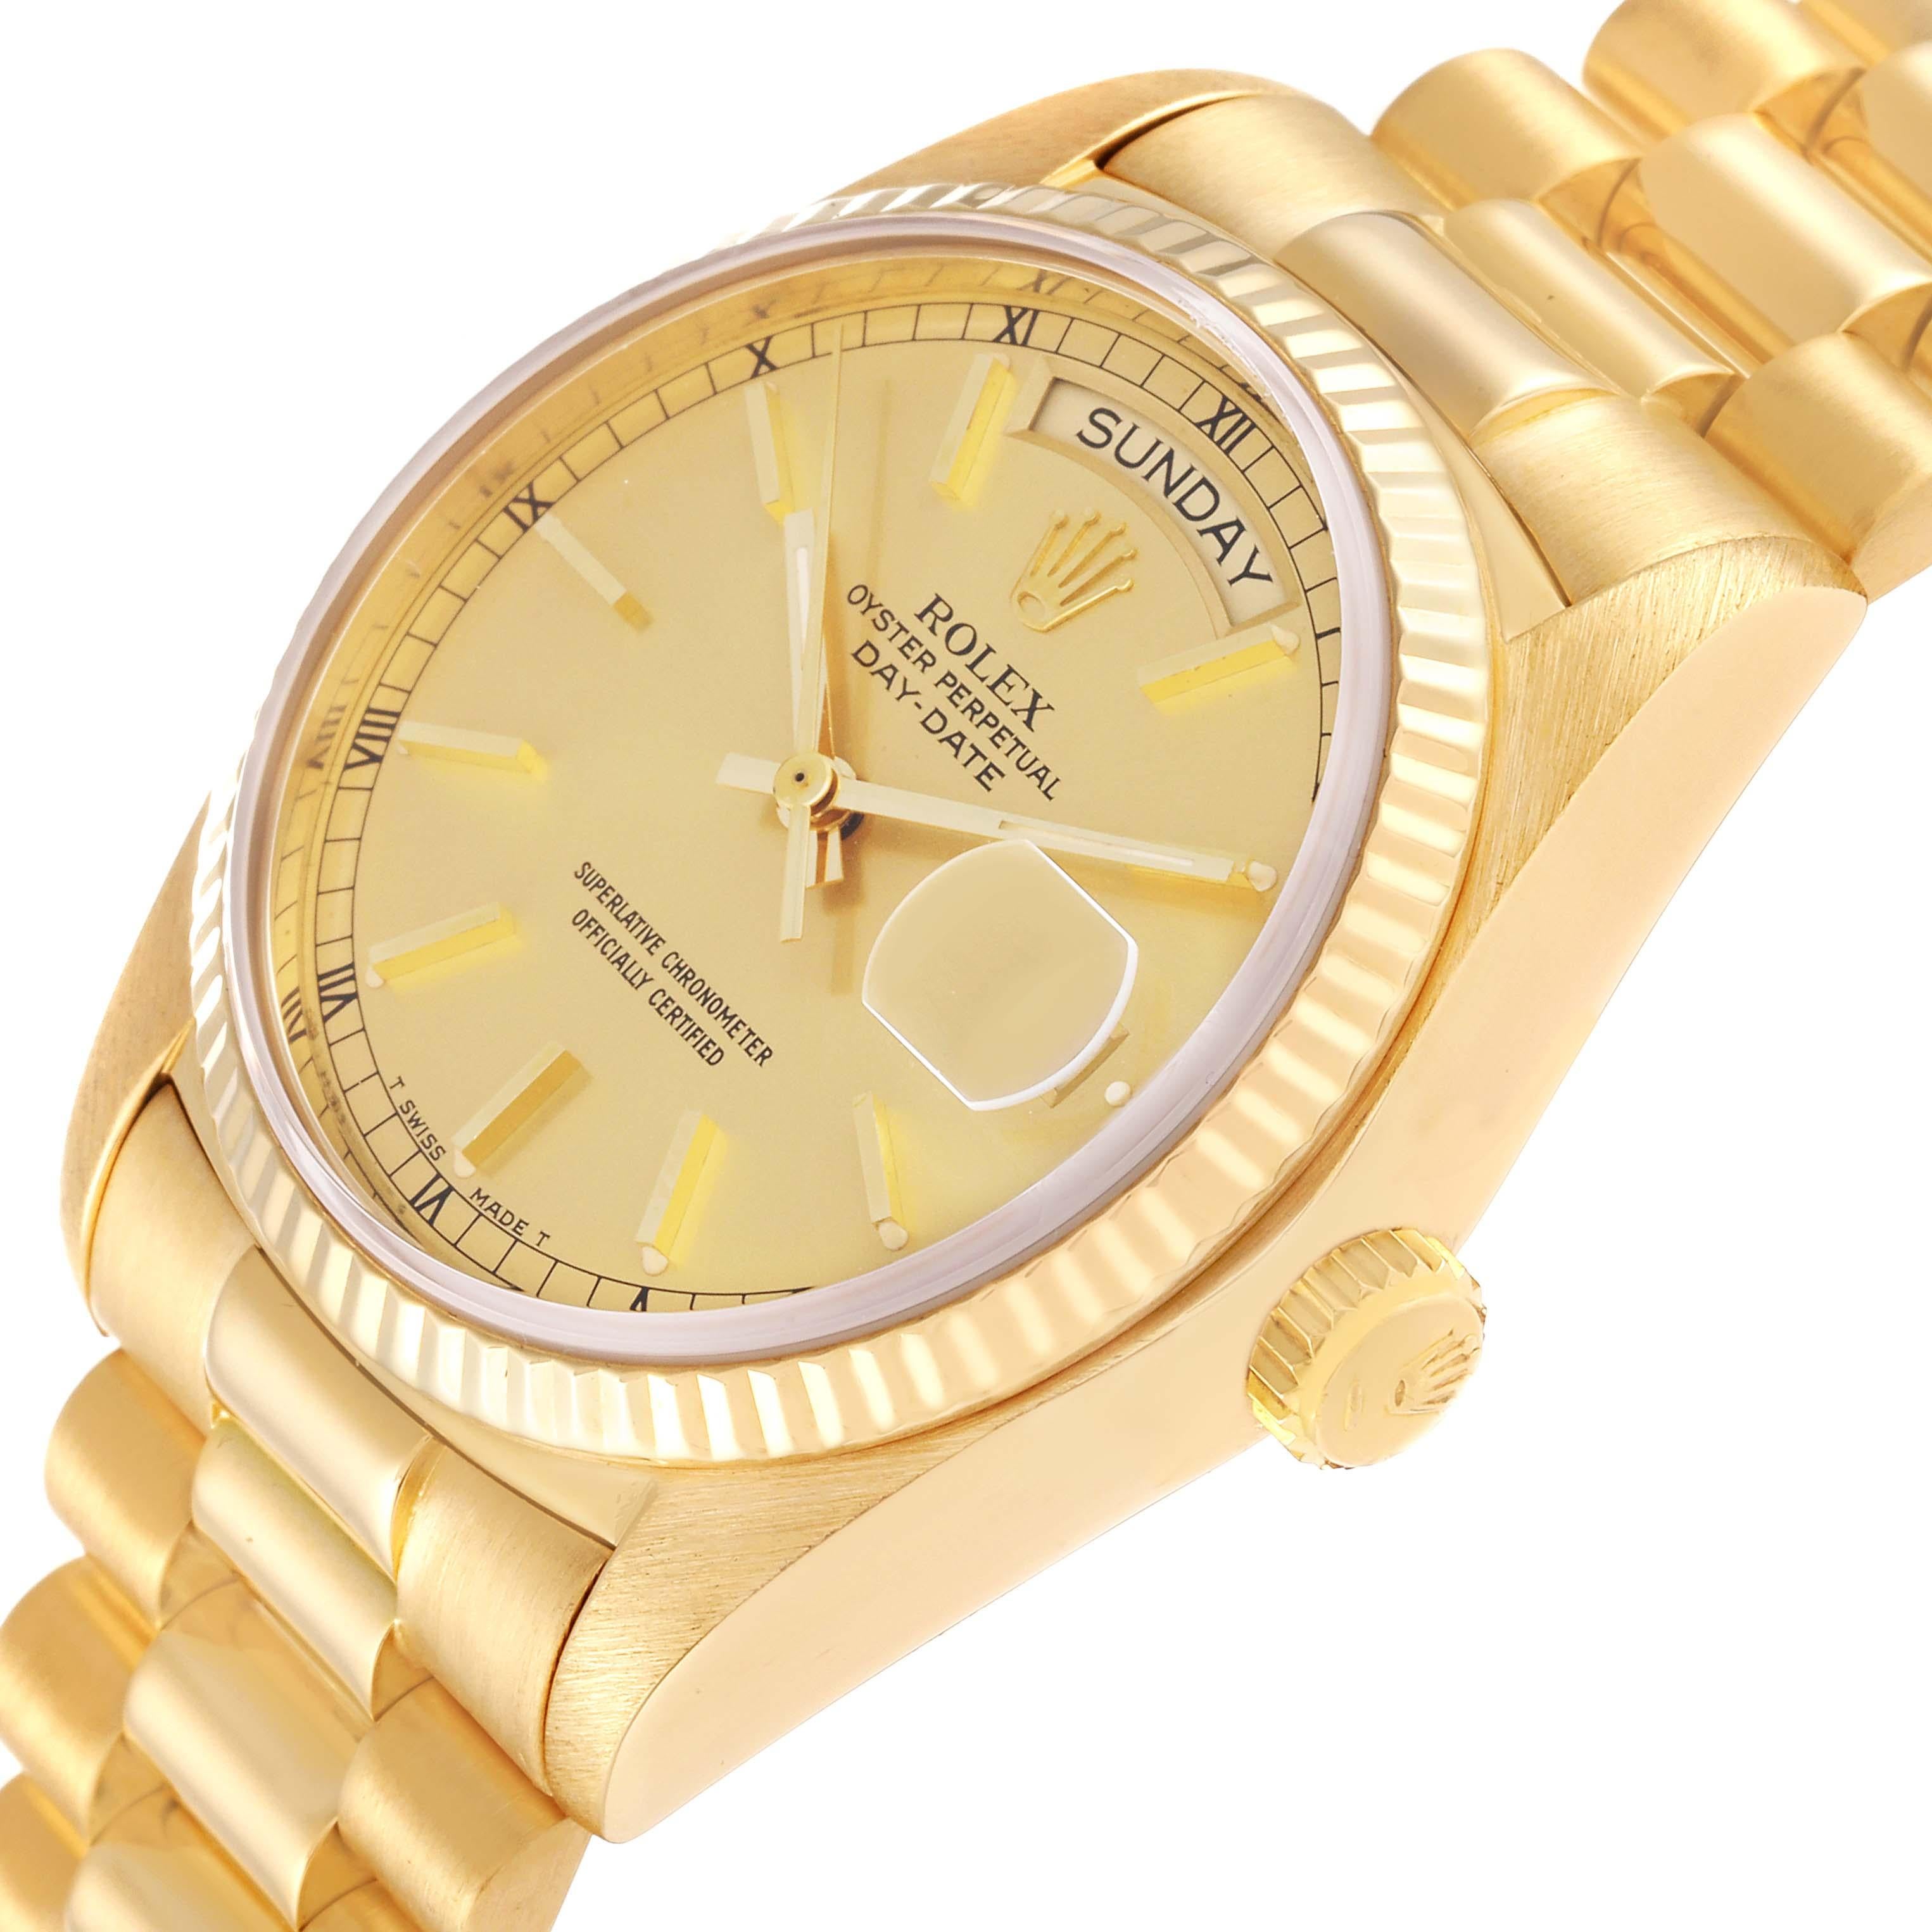 Rolex President Day-Date Yellow Gold Champagne Dial Mens Watch 18038 Box Papers 1